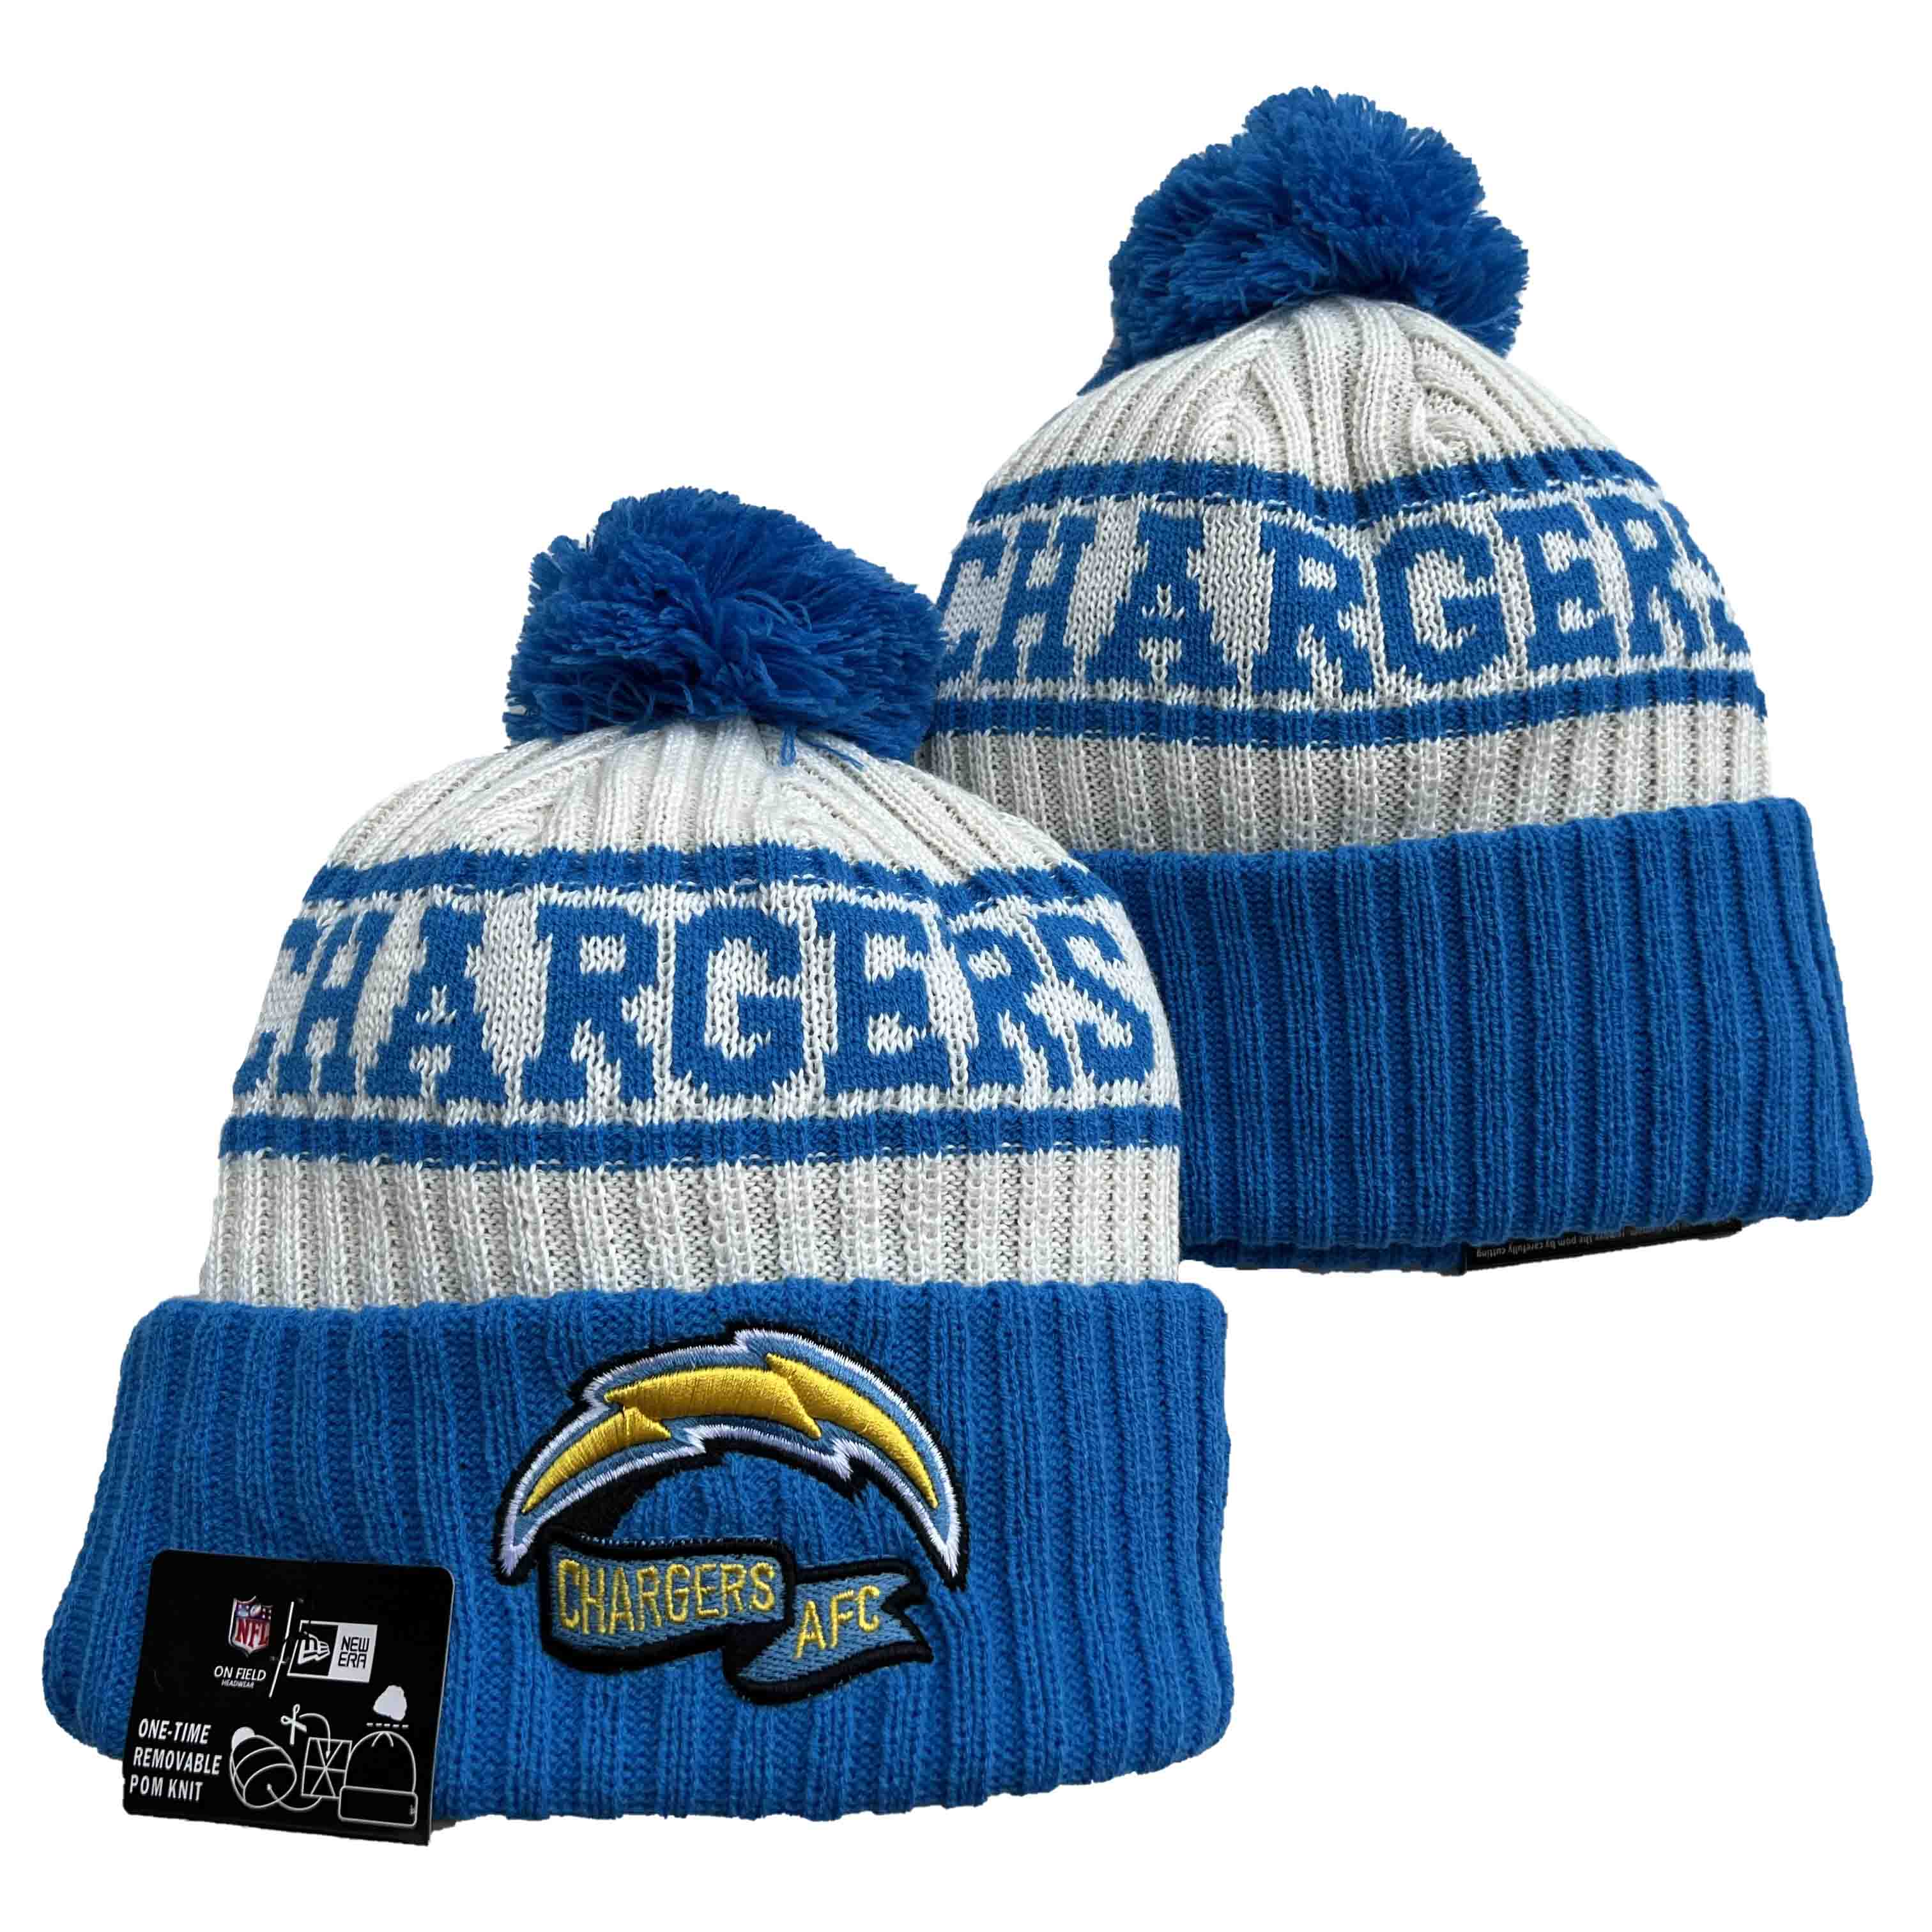 NFL San Diego Chargers Beanies Knit Hats-YD1115